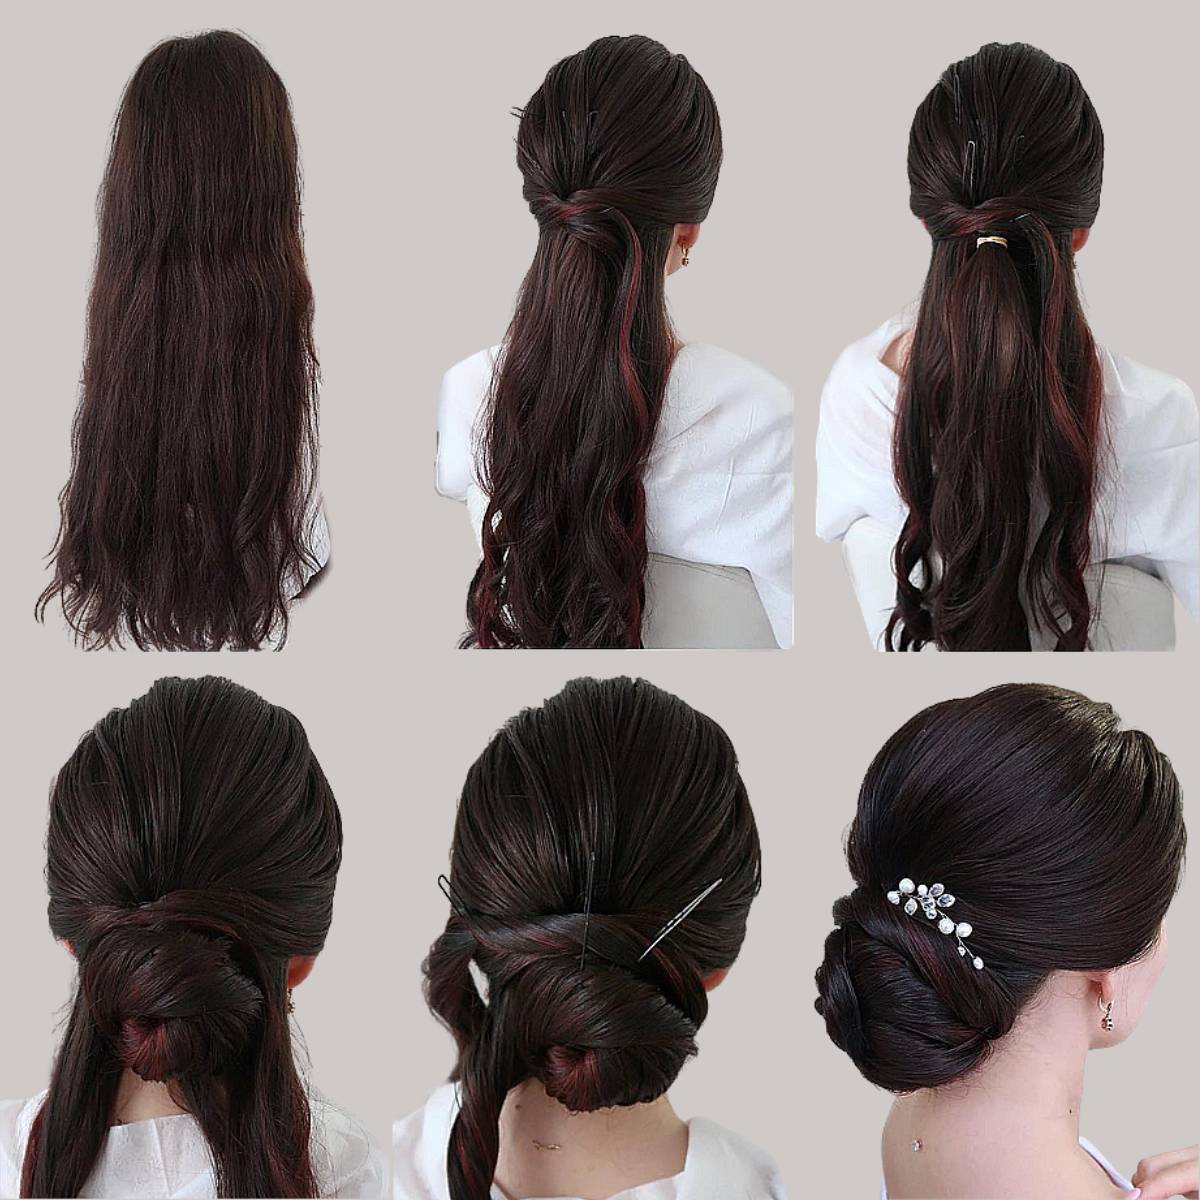 15 Hairstyles for Long Hair by Another Braid - YouTube